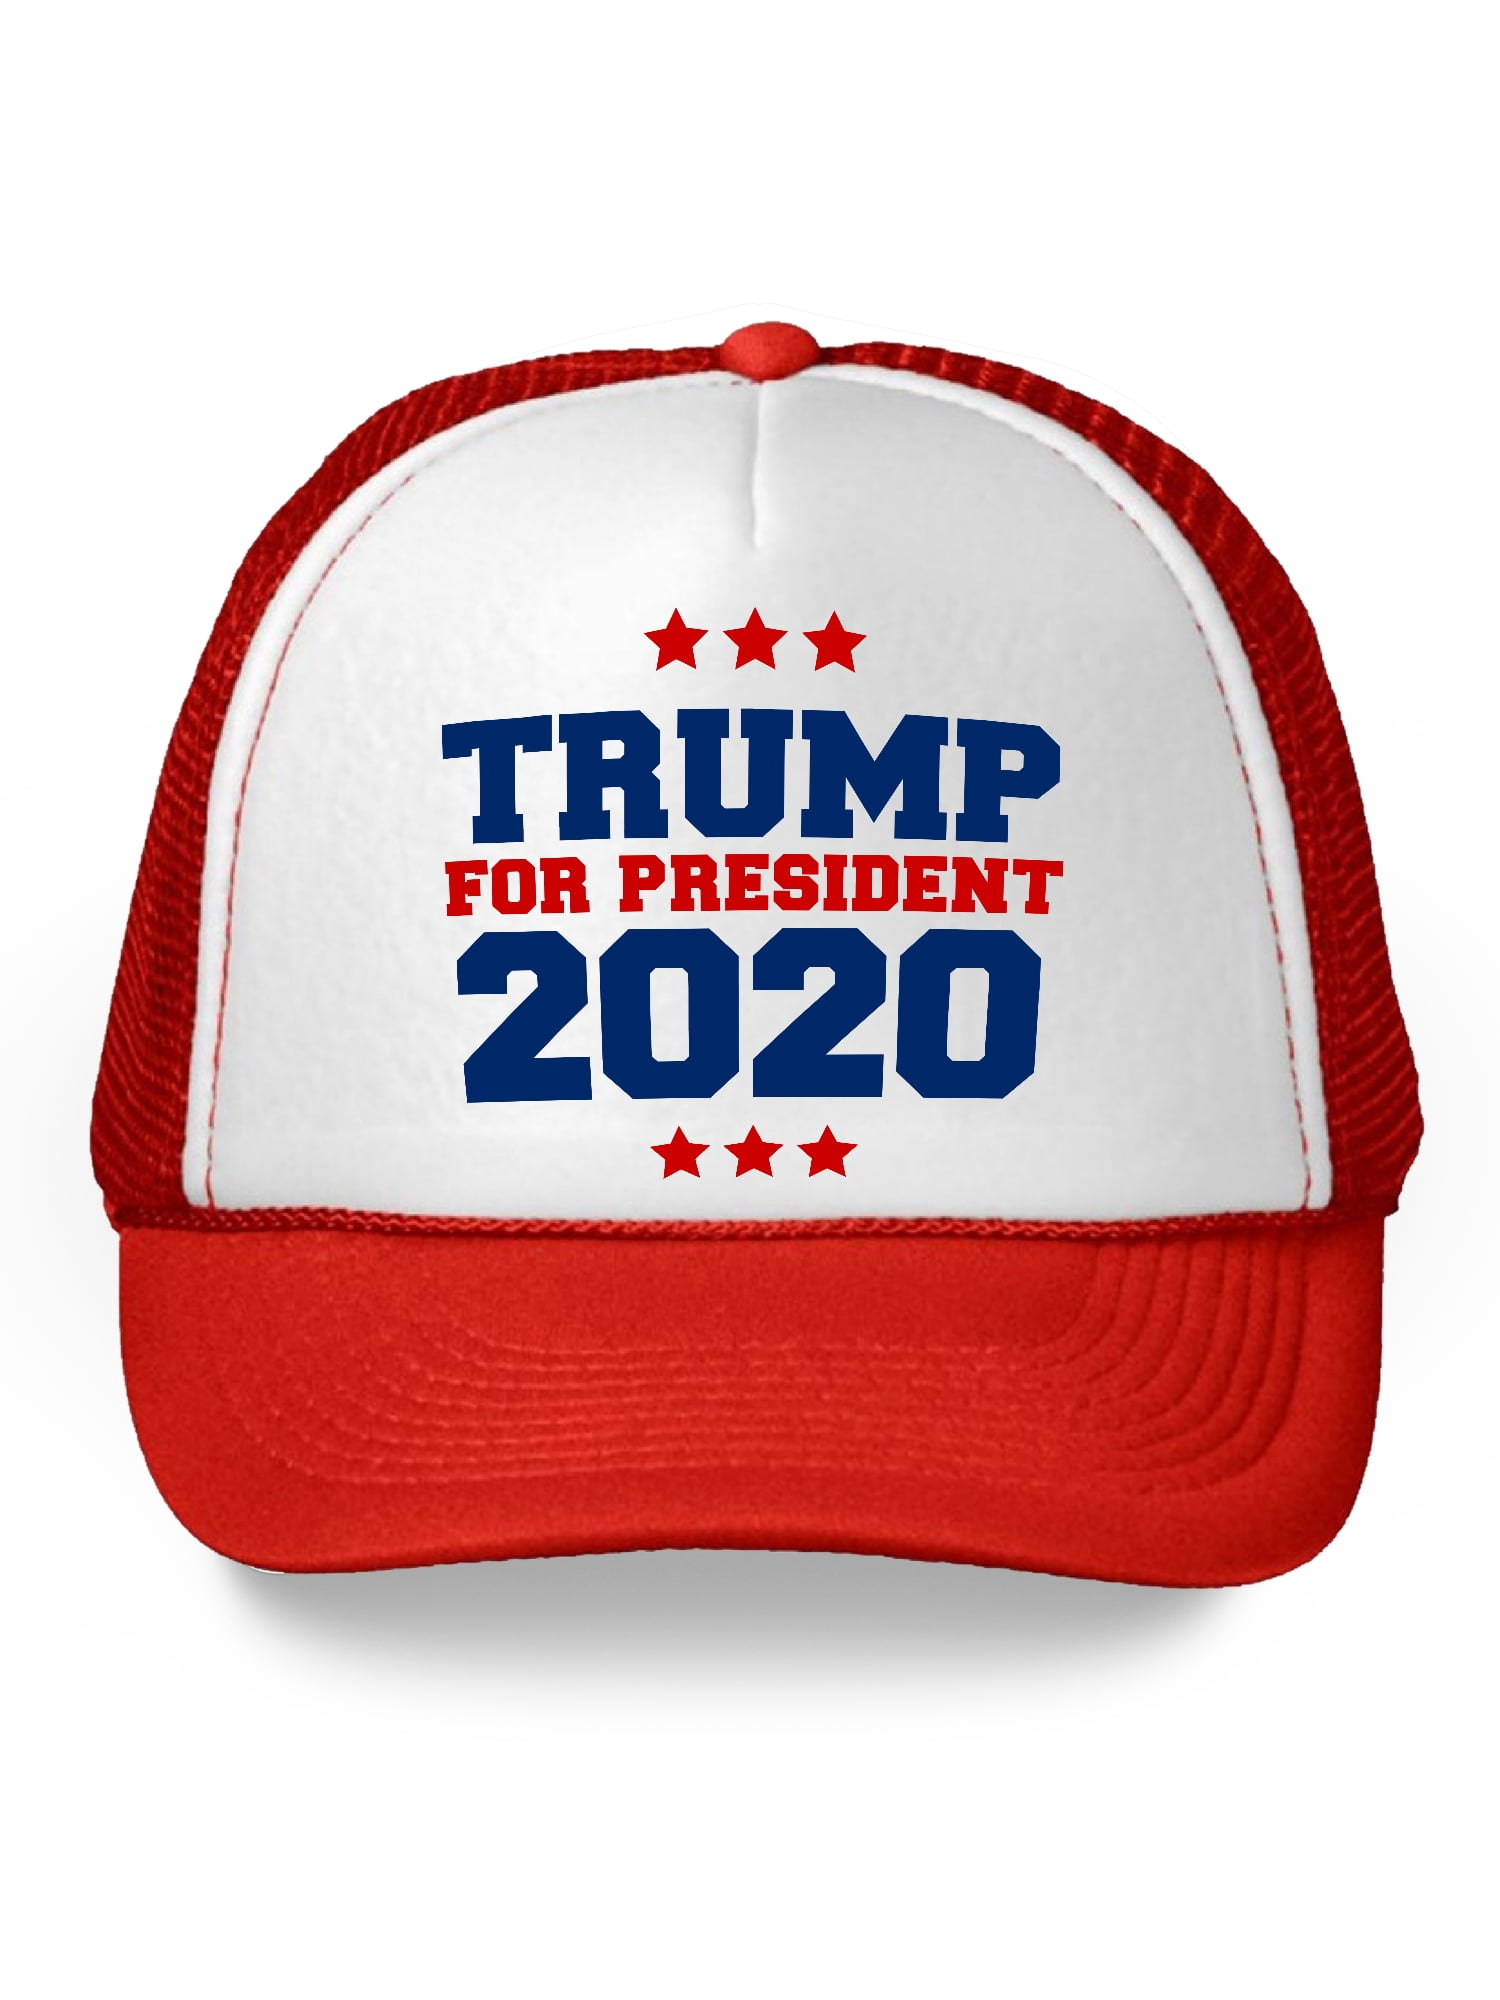 2020 Donald Trump President Make America Great Again Hat Red Bucket Hat USA DP 